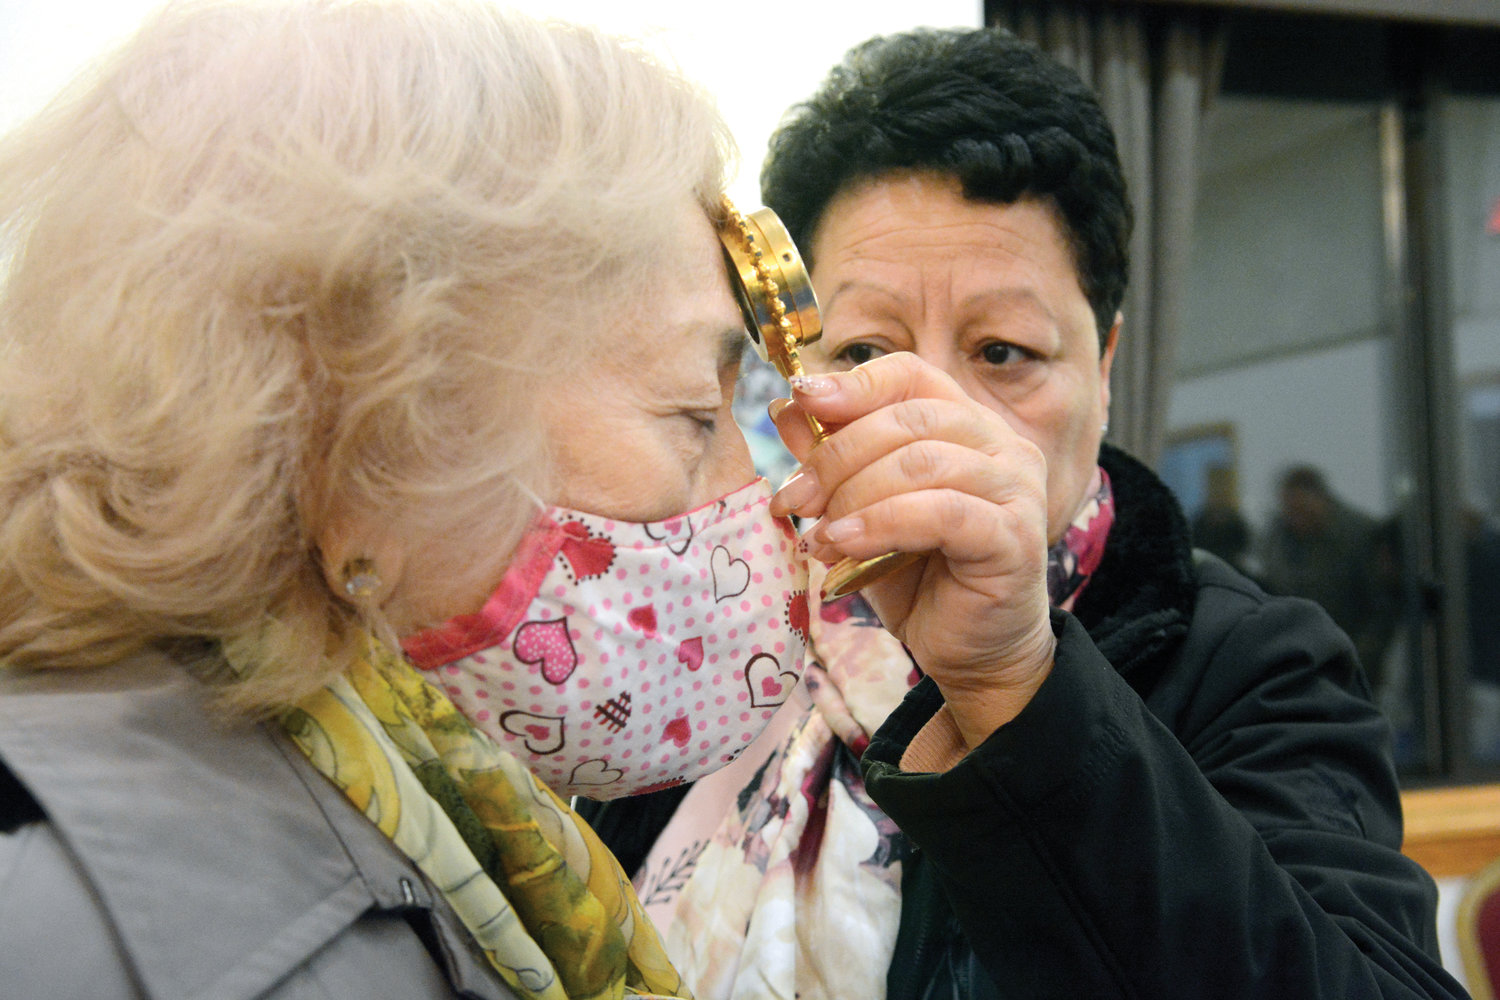 Agnes Davila holds a relic to Marcia Muros’ forehead. Both women are Eucharistic ministers at the shrine.